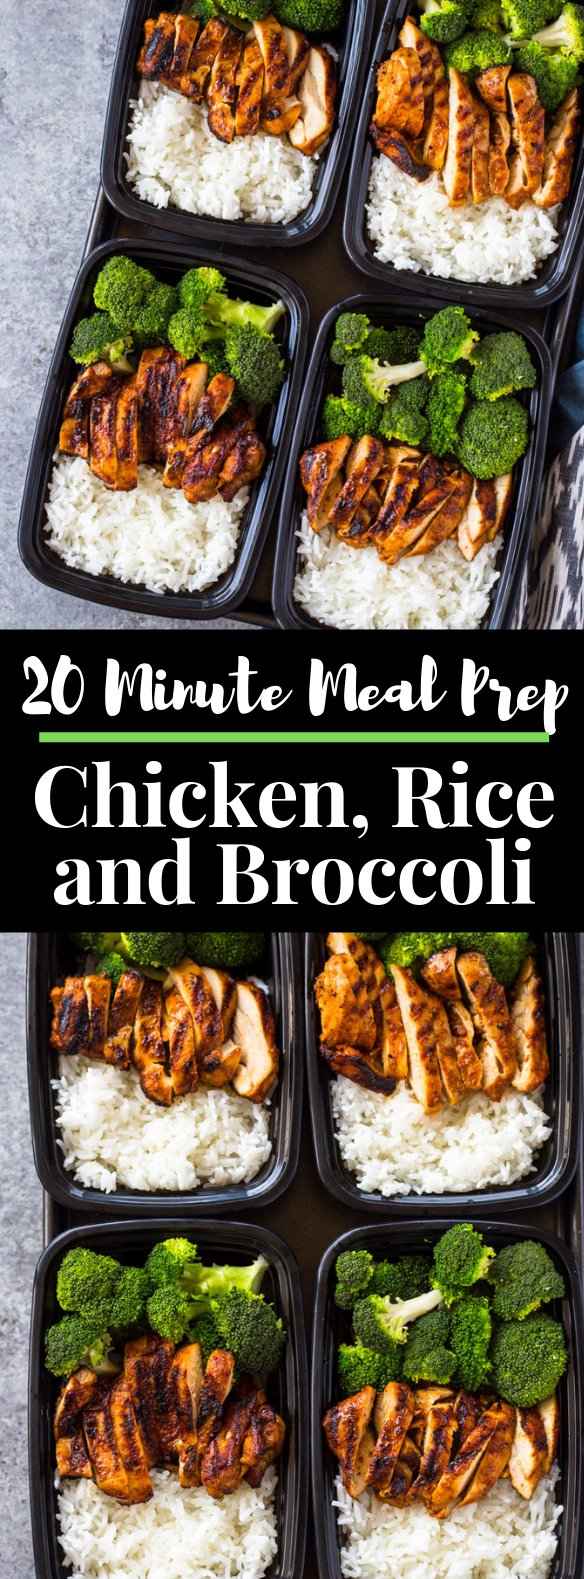 20 MINUTE MEAL-PREP CHICKEN, RICE AND BROCCOLI #healthylunch #lowcalorie